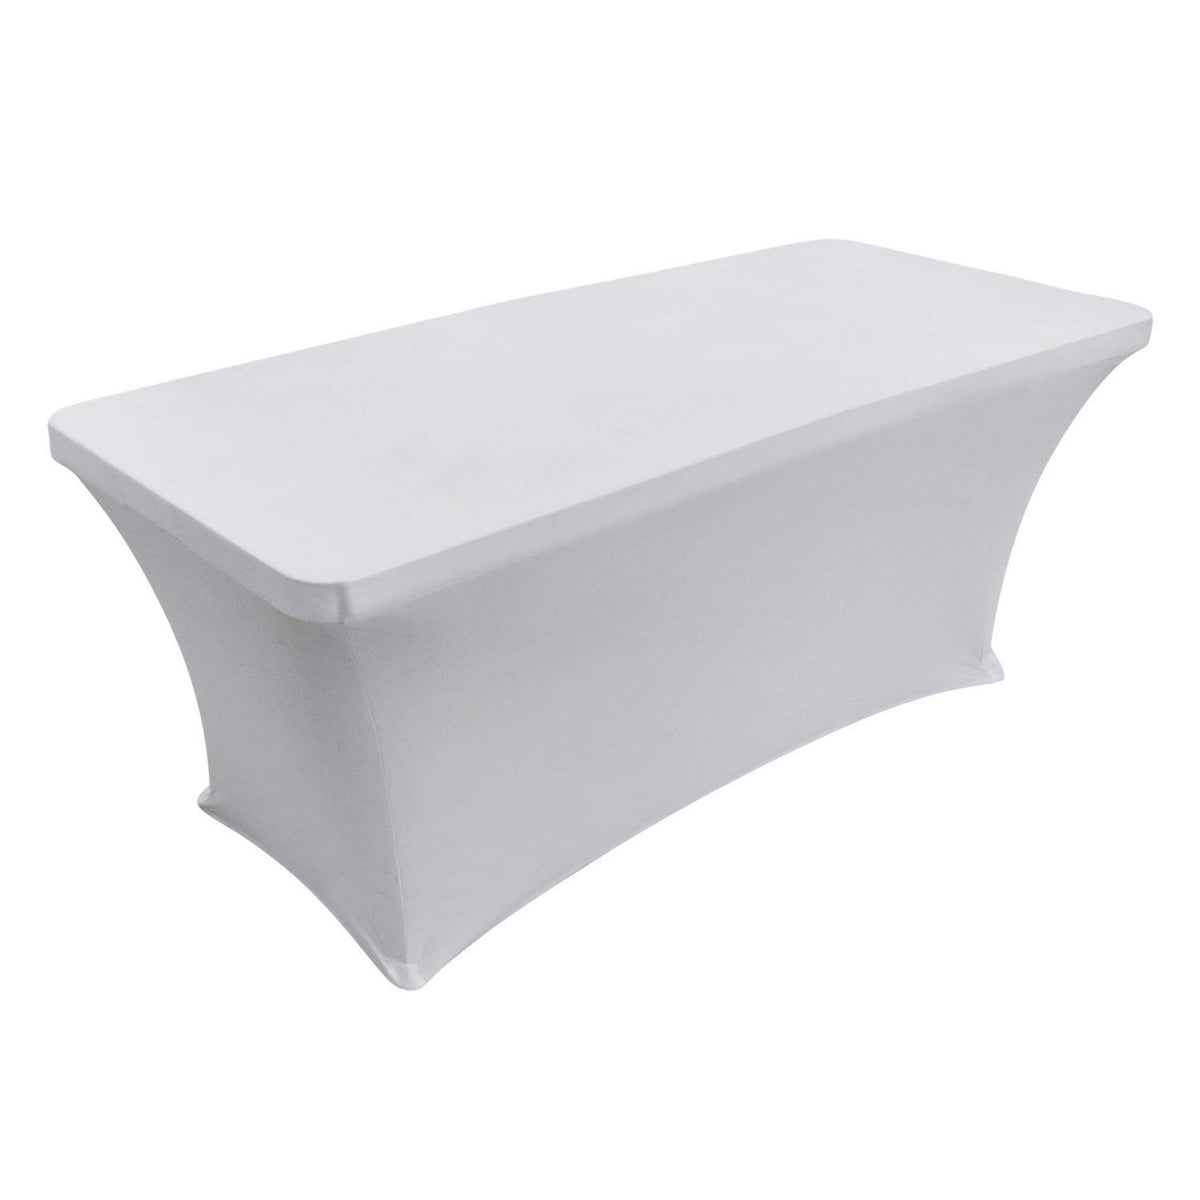 Table cover - White Color